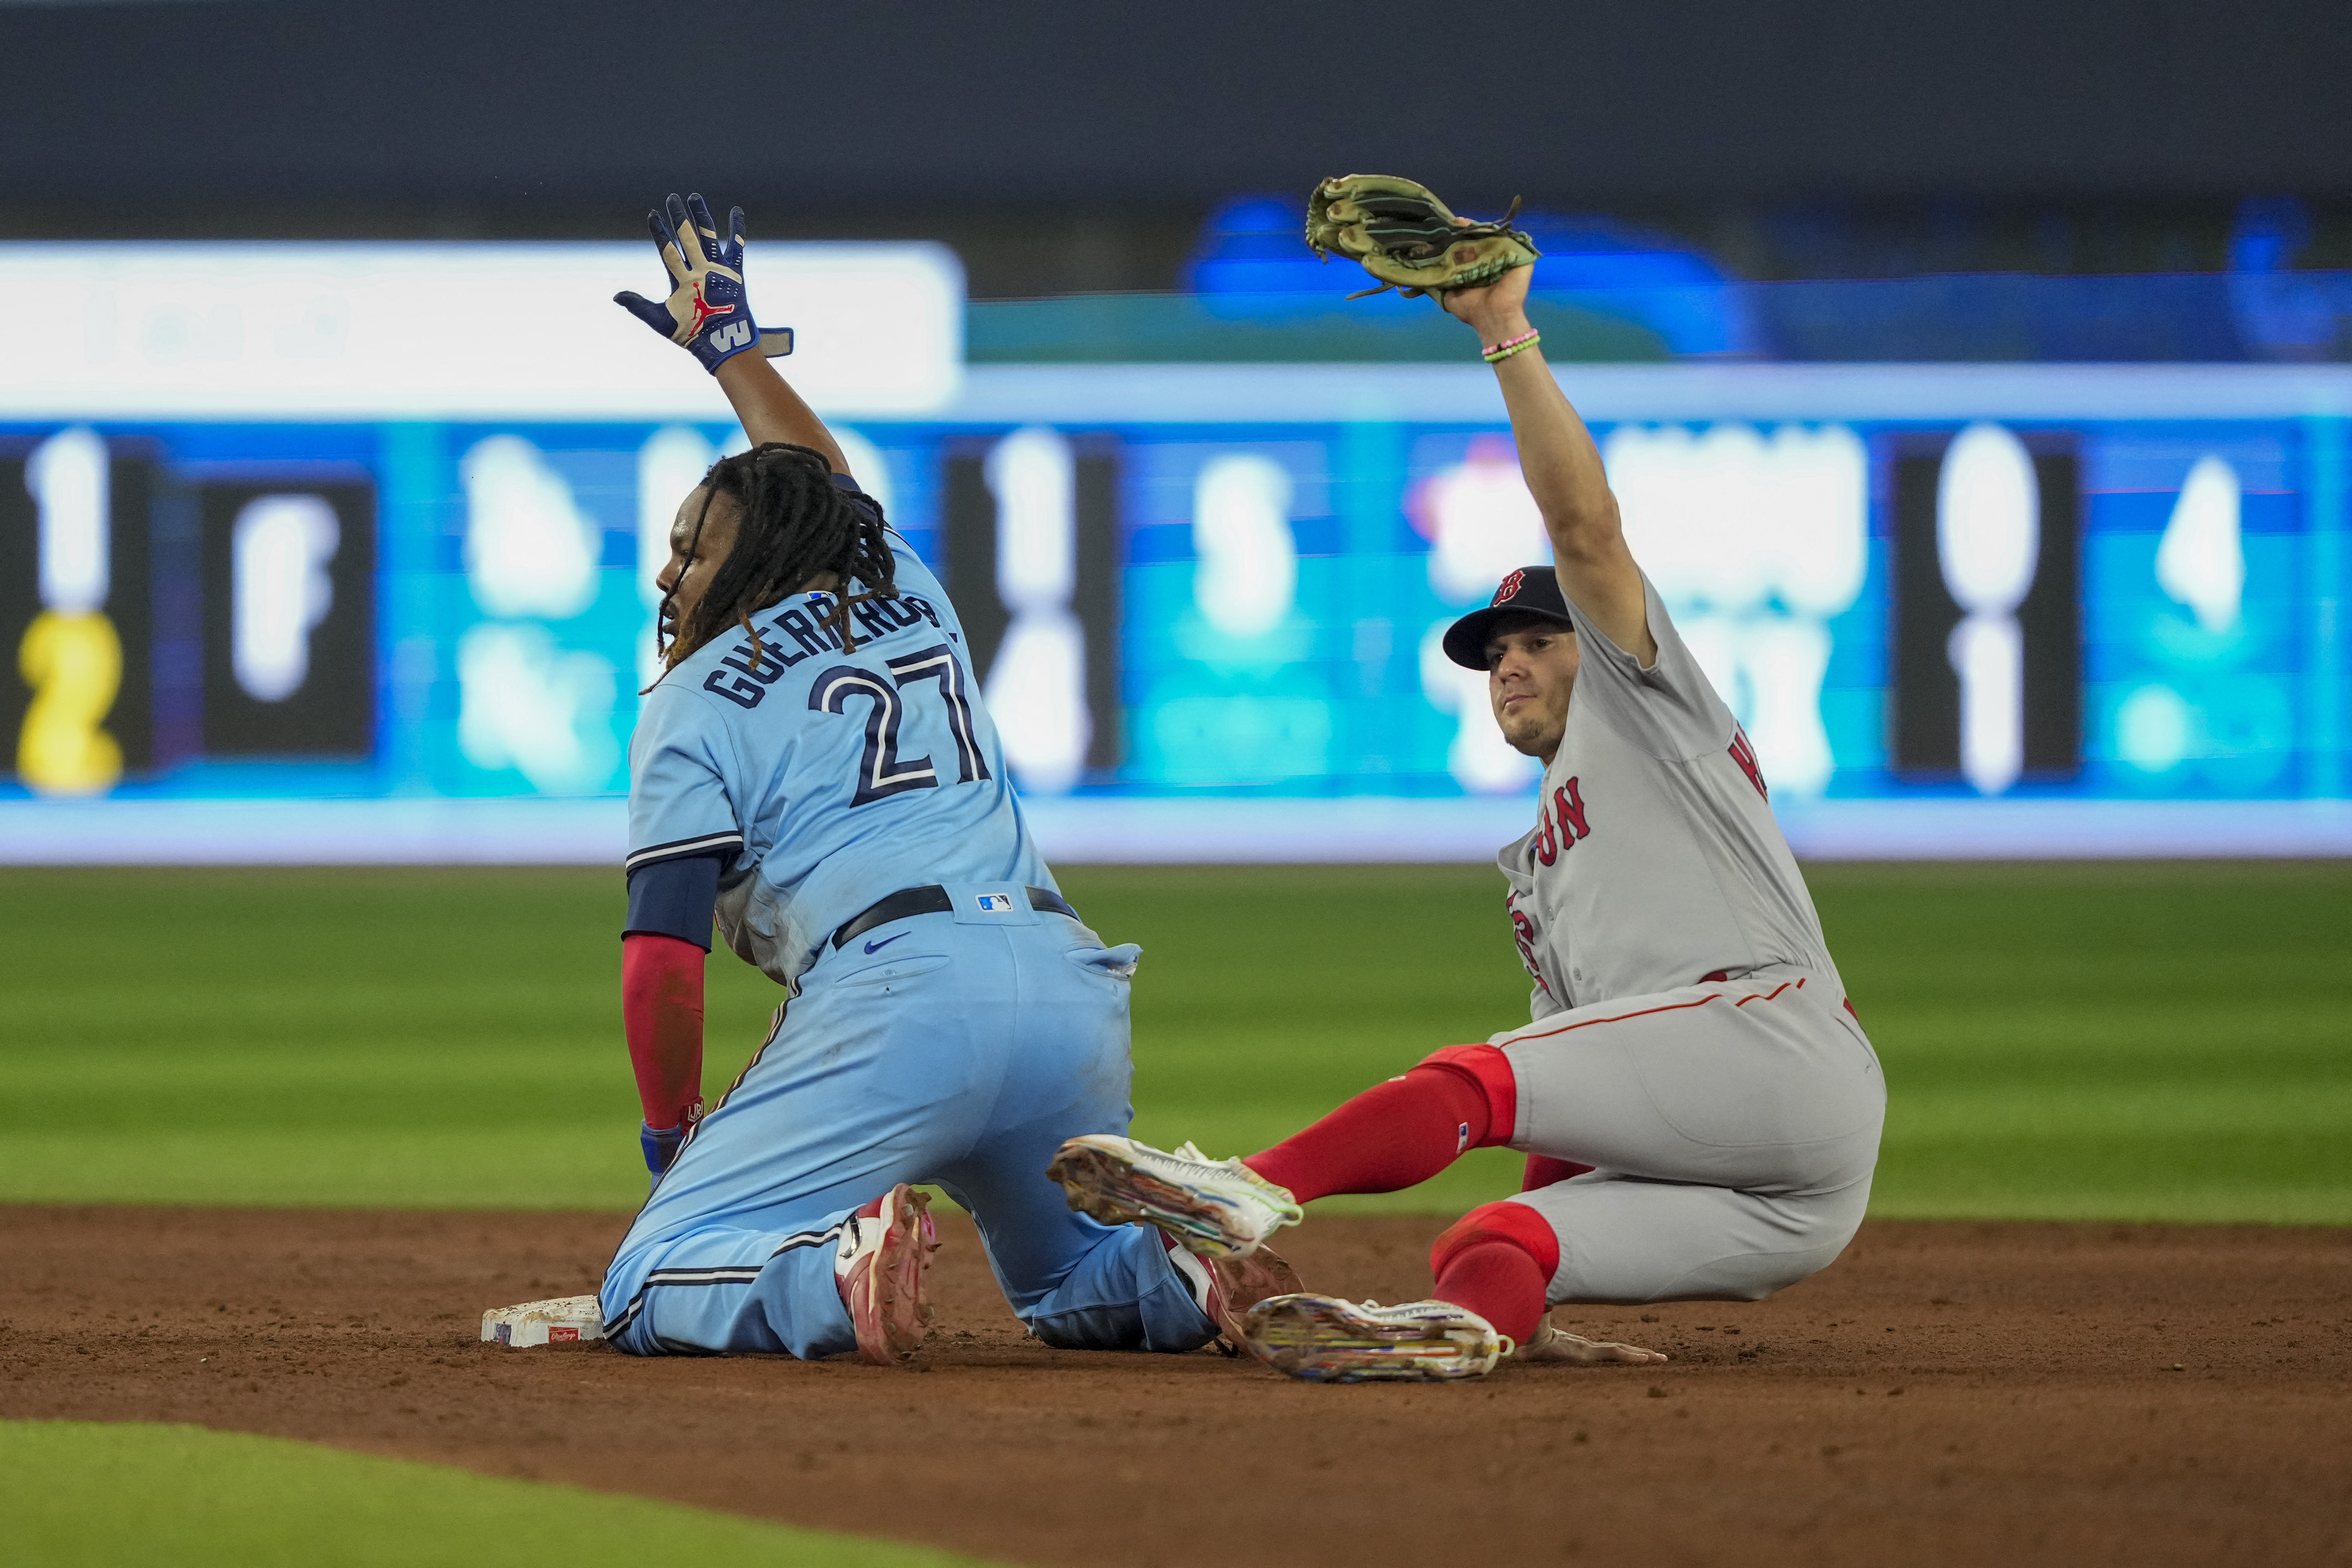 Verdugo home run in 9th gives Red Sox 5-4 win and sweep of Blue Jays